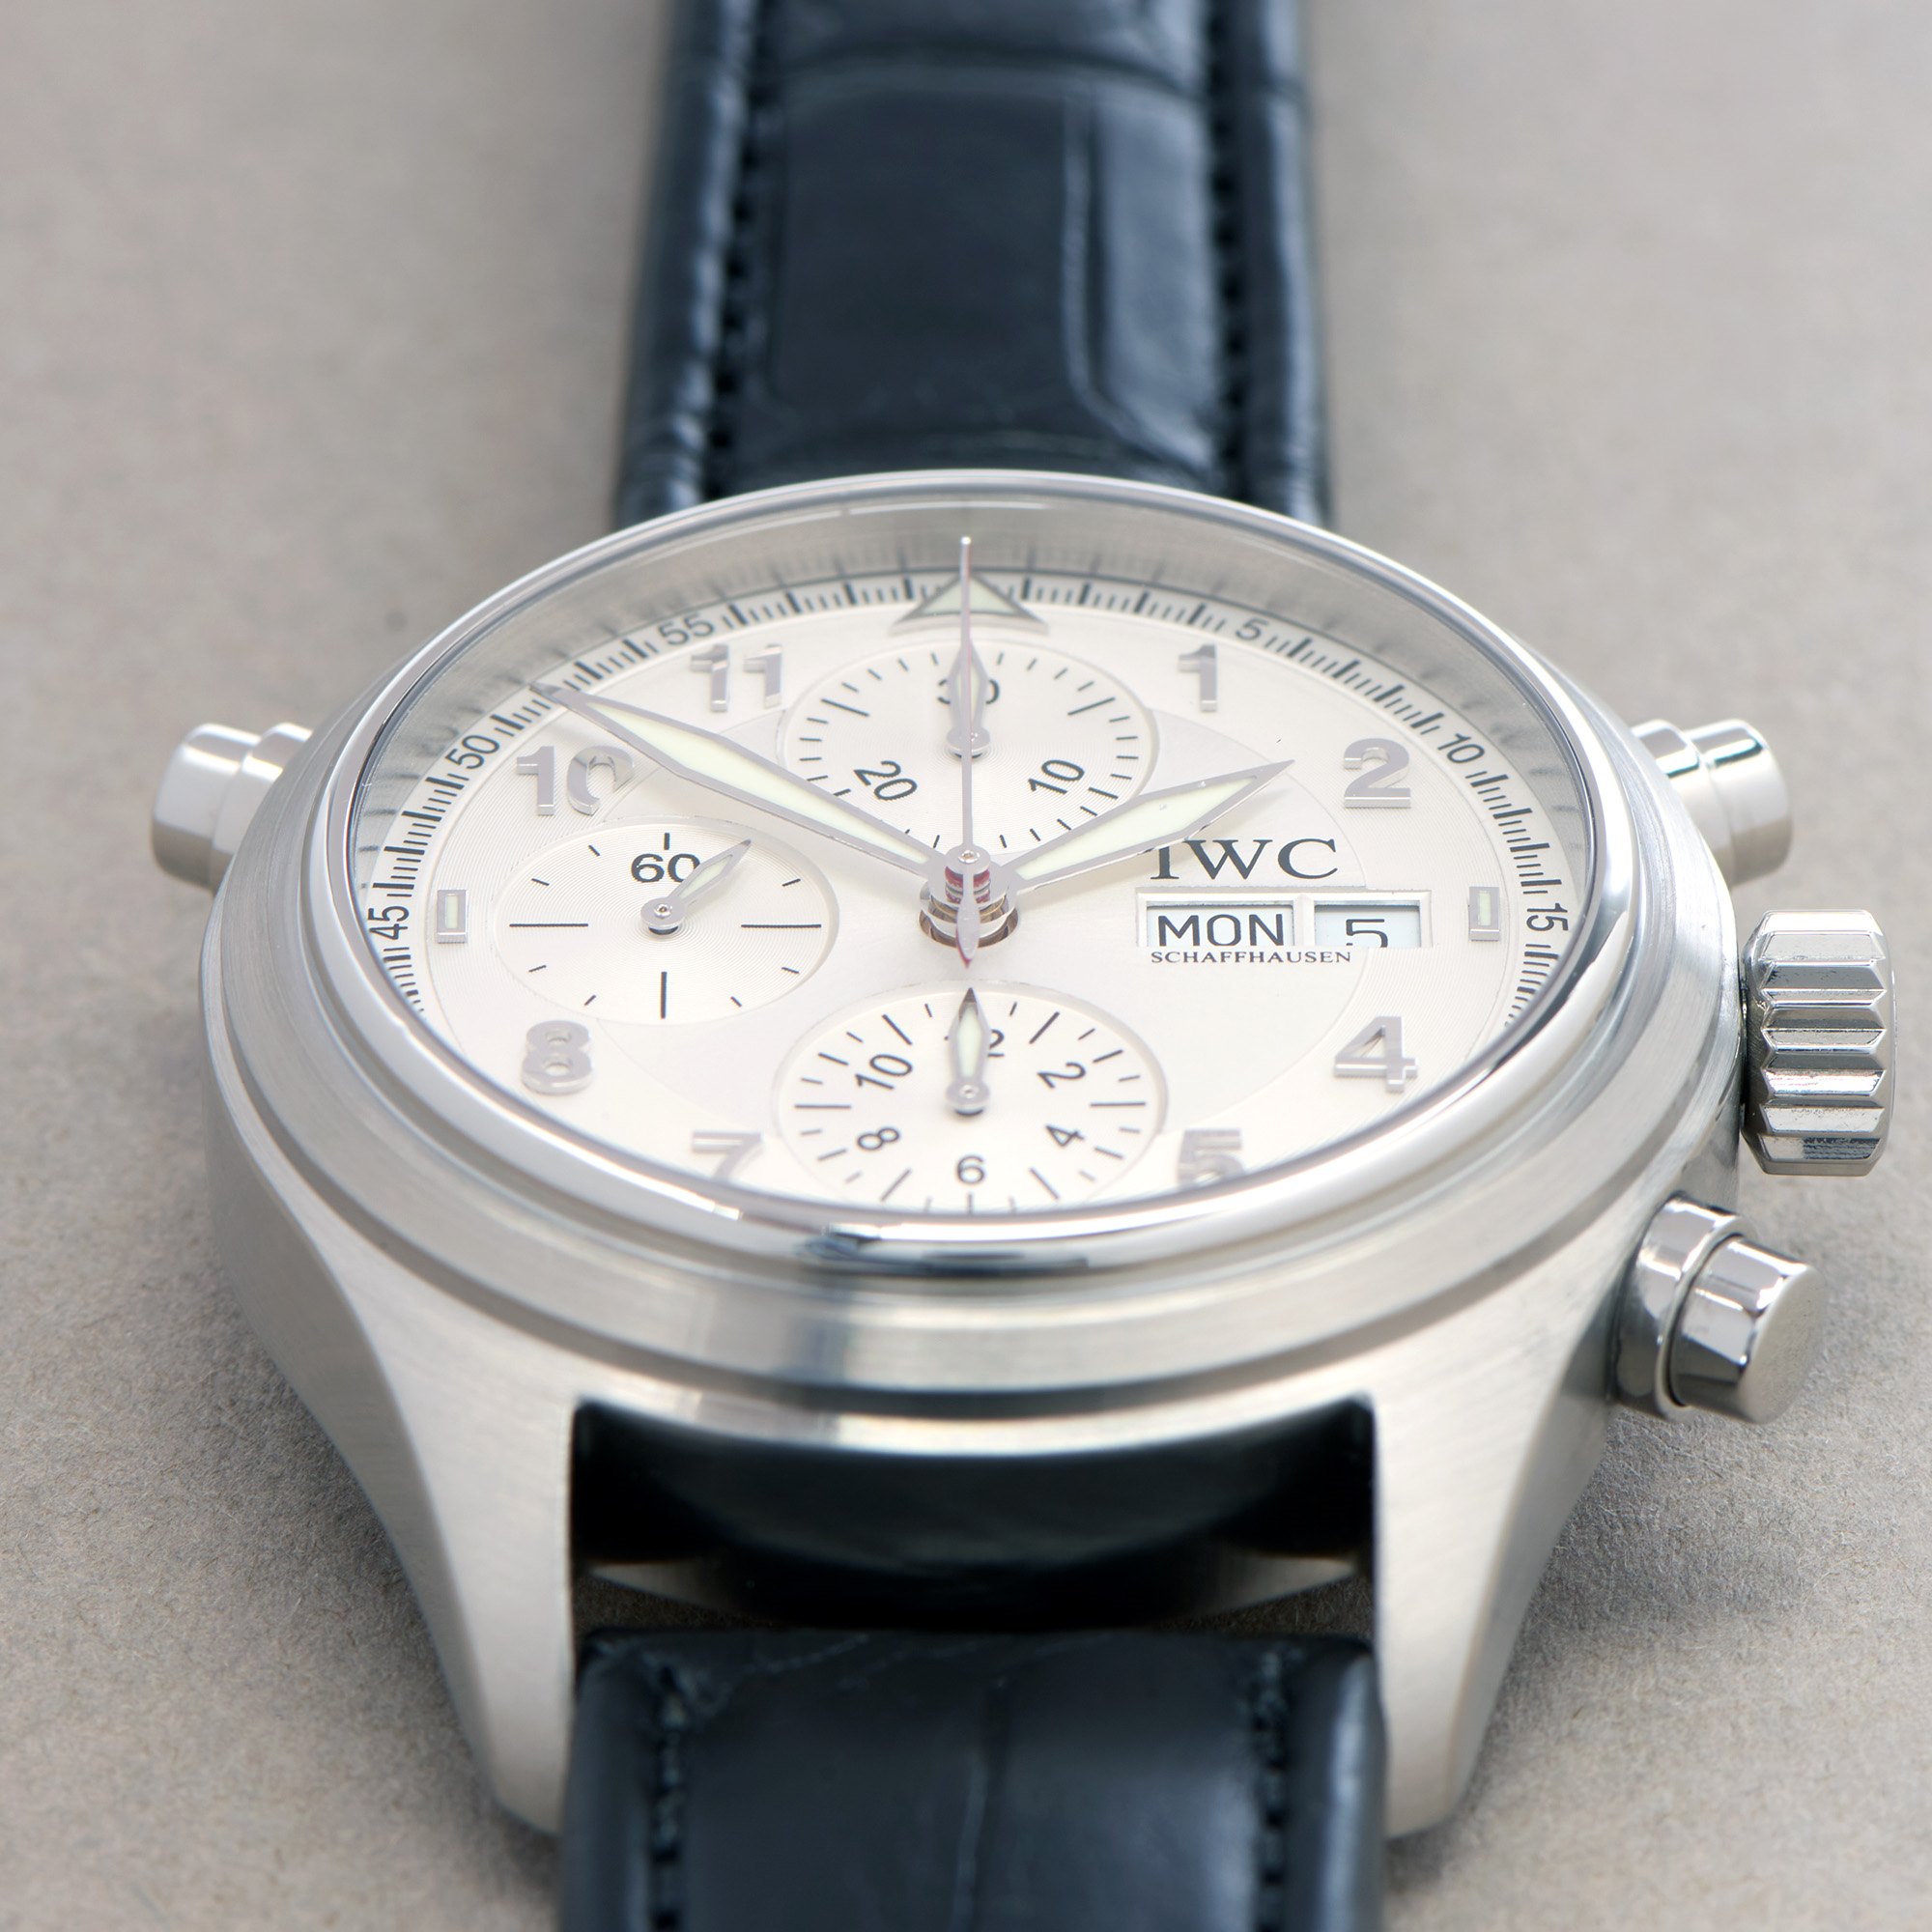 IWC Pilot's Chronograph Spitfire Double Chronograph Stainless Steel IW371343